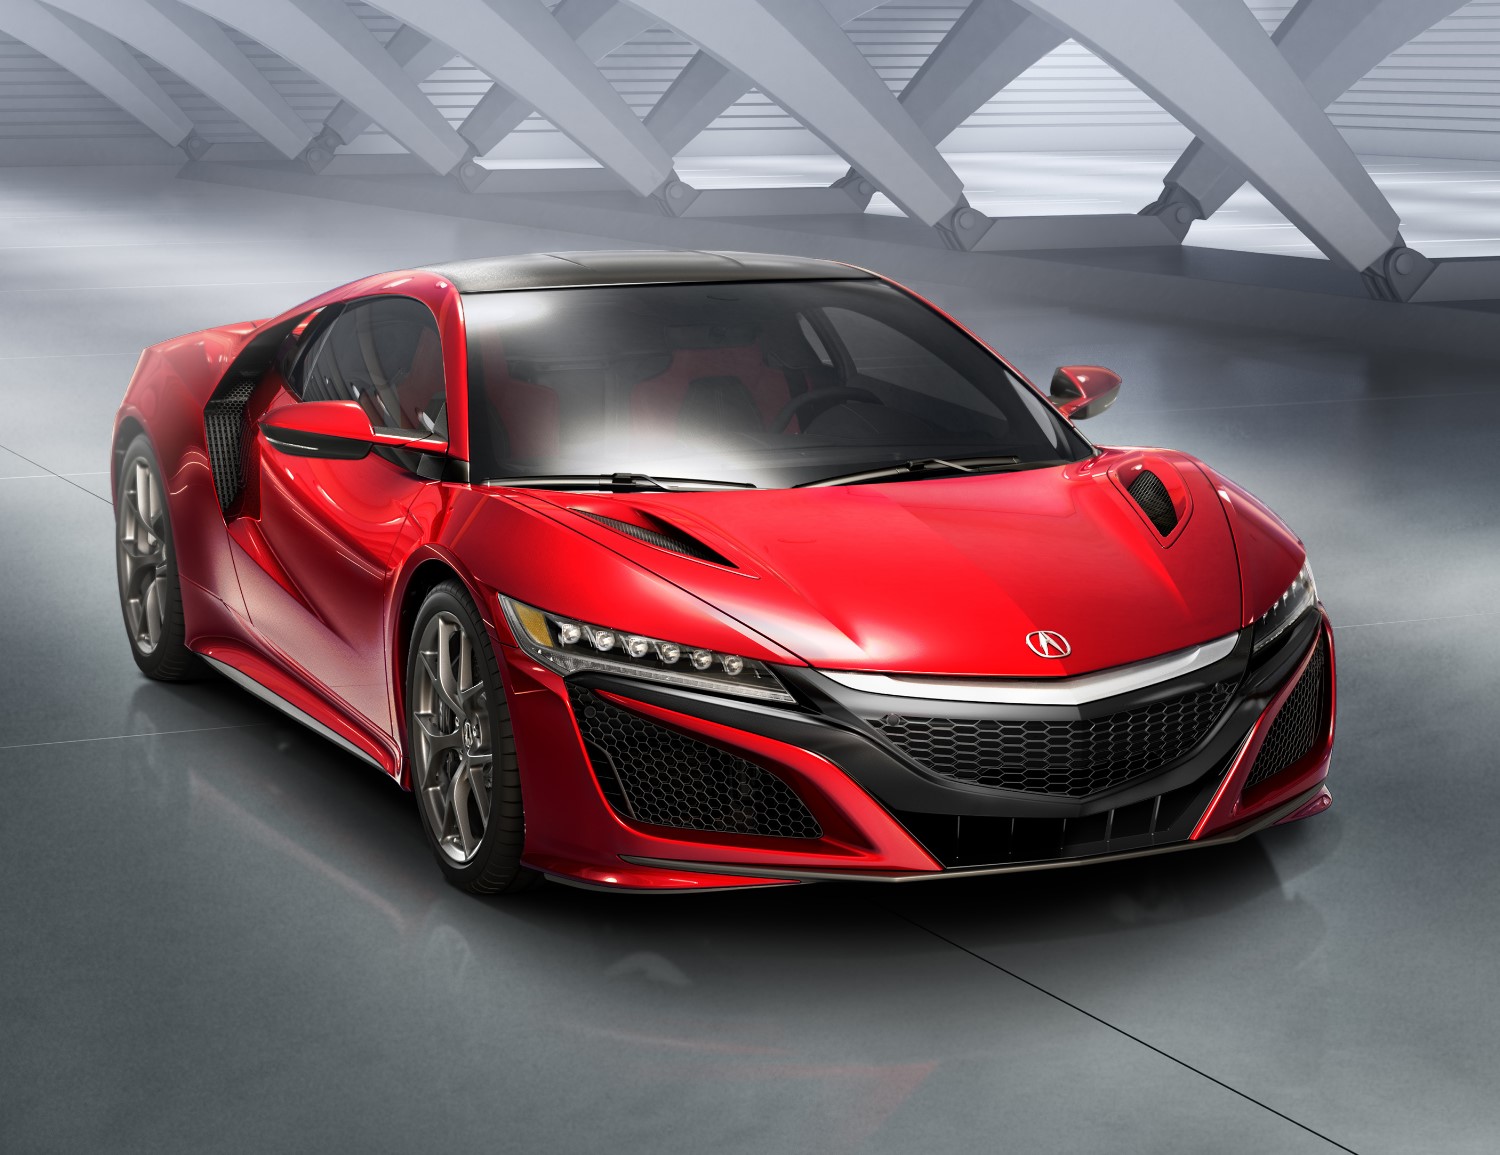 Hendrick even bought VIN 001 of the new Acura NSX